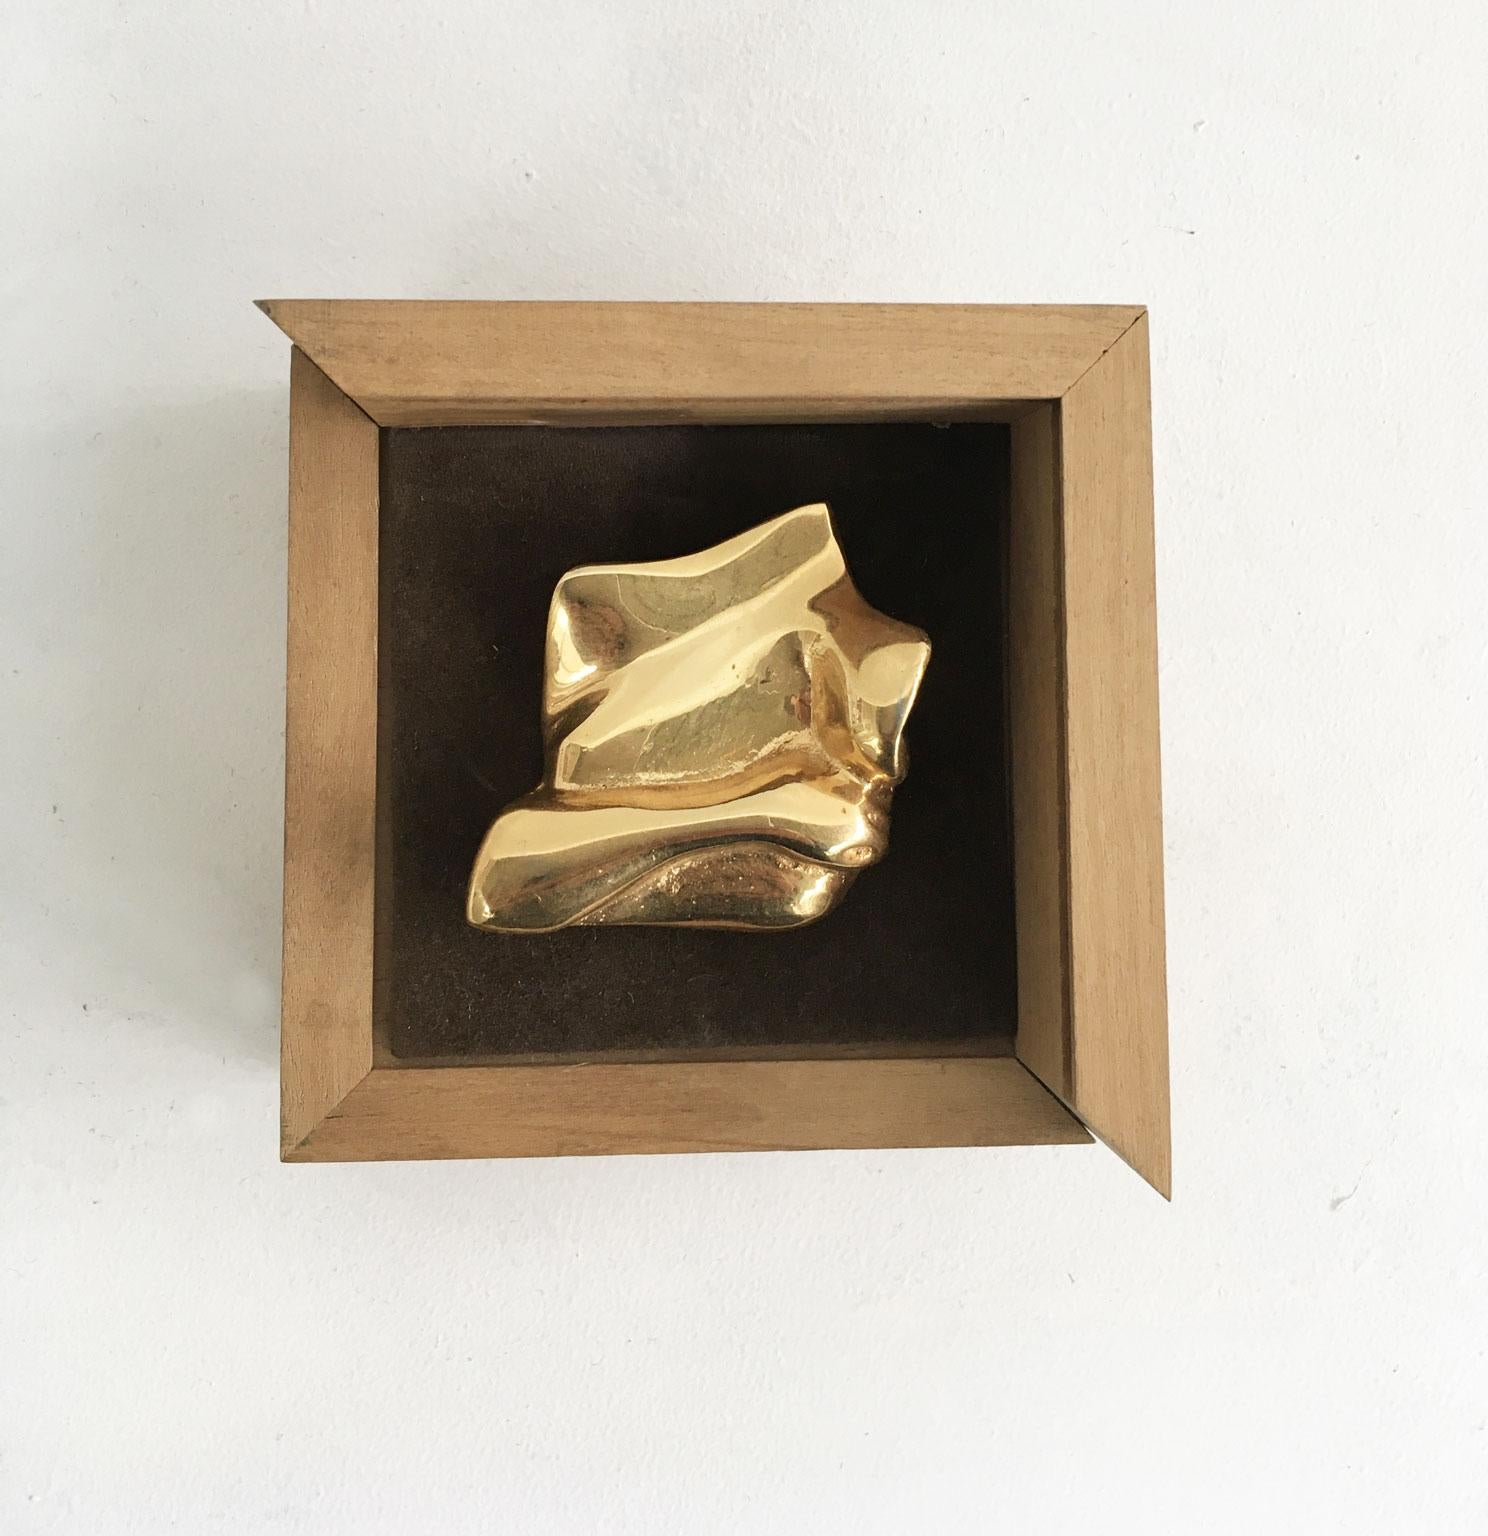 This is an engaging bronze sculpture create by the Italian artist Patrizia Guerresi, in the 1986. The piece is a multiple of 5000 specimen on a green painted wooden base. The title of this artwork is 